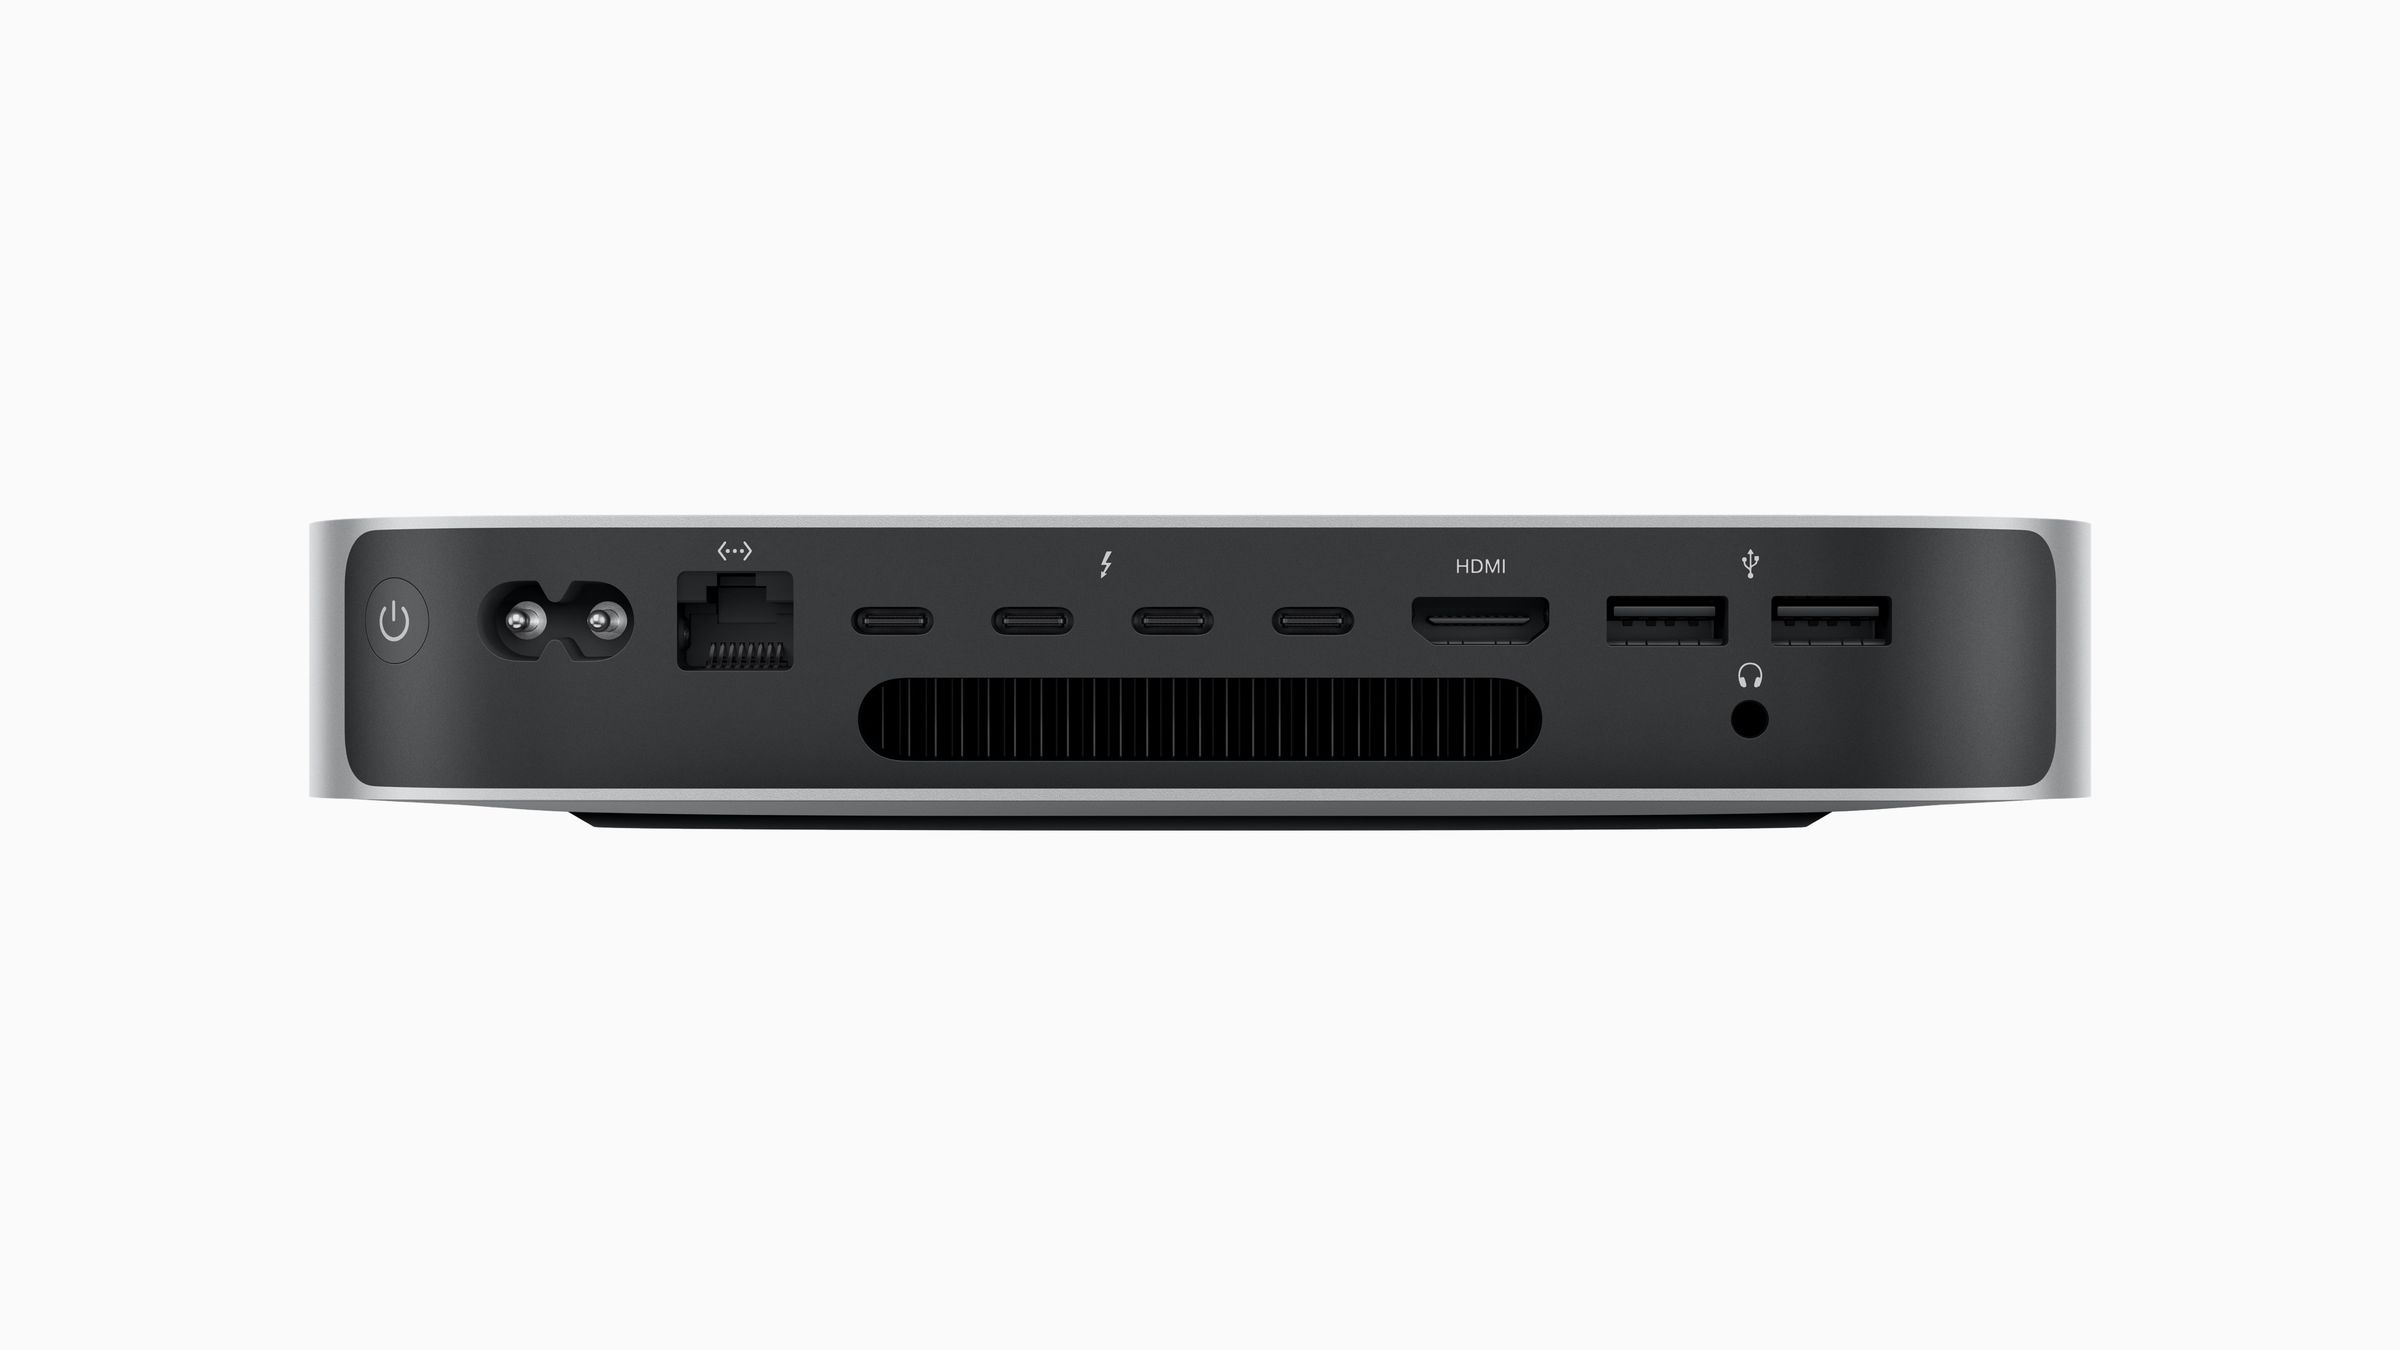 These are some great I/O ports on the back of the M2 Pro Mac Mini.  If only it had an SD card slot too.